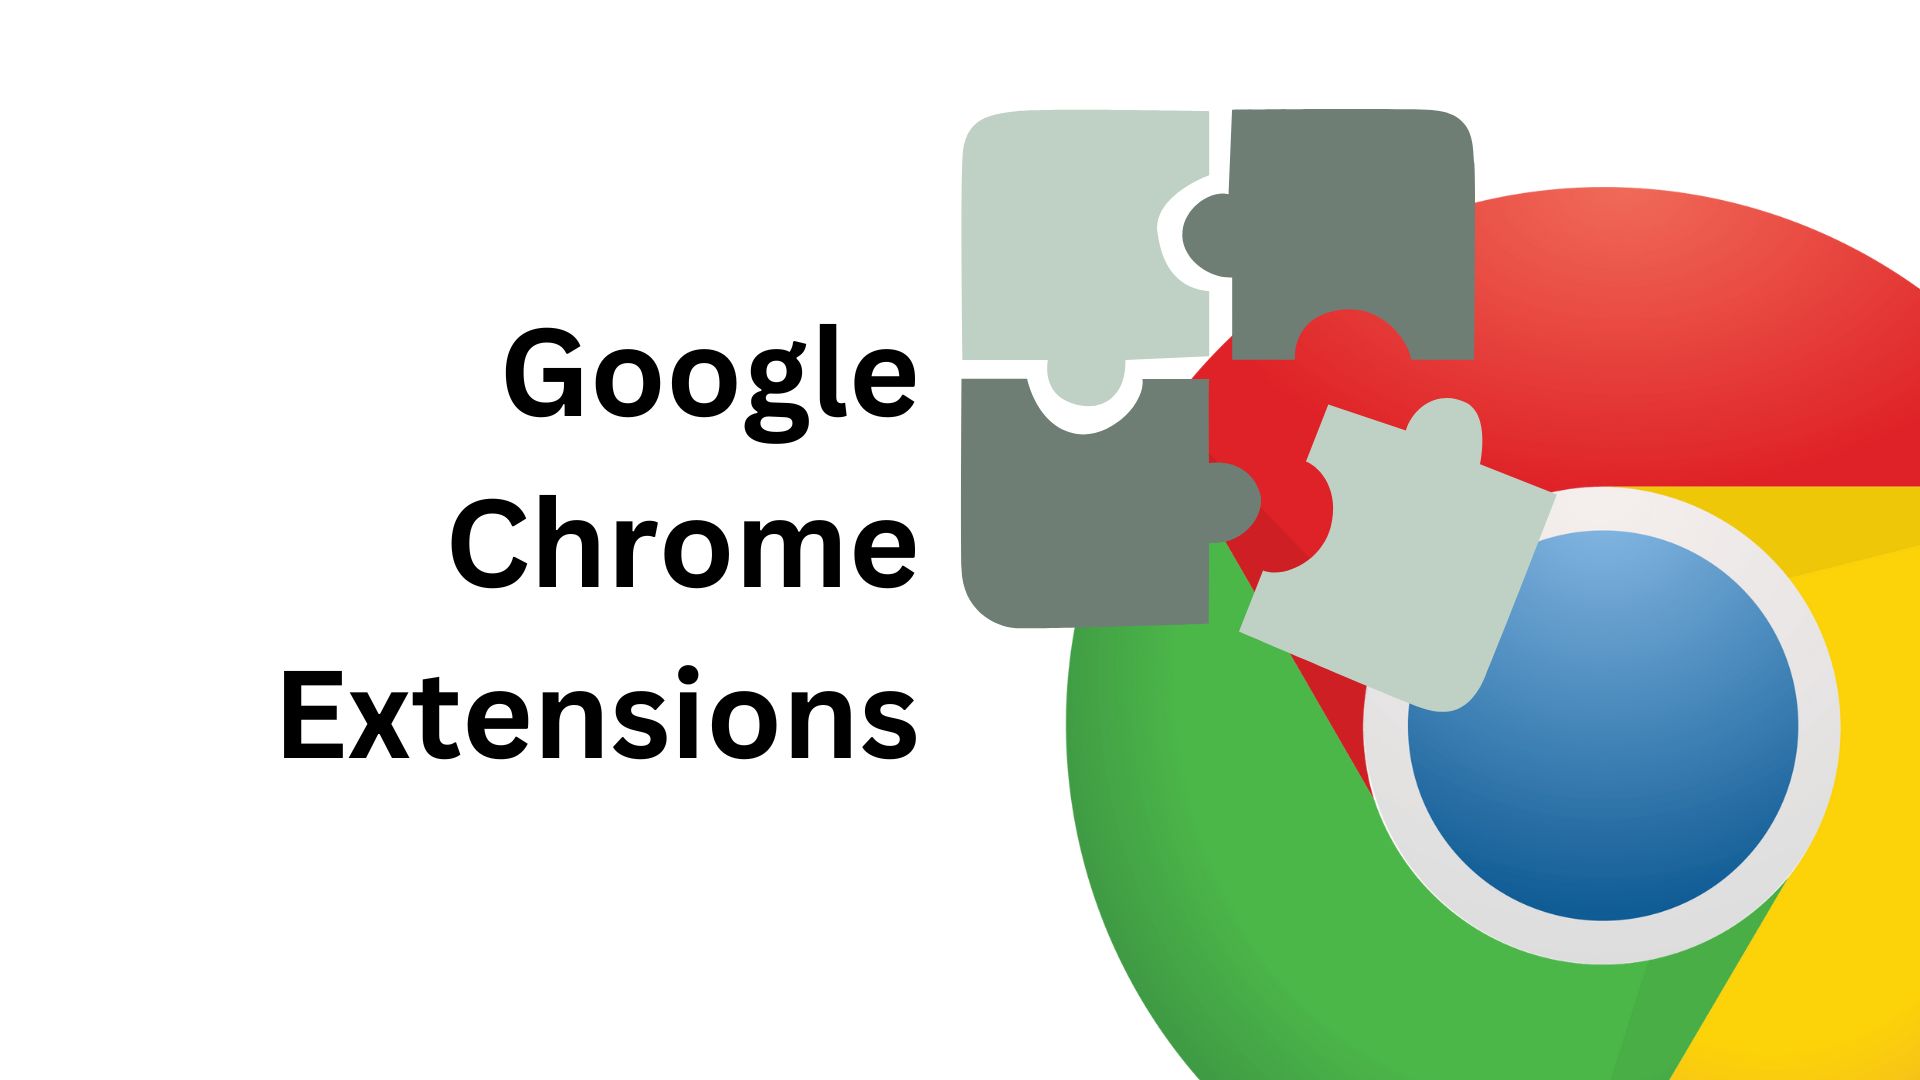 How To Level Up Your Online Experience Through Chrome Extensions